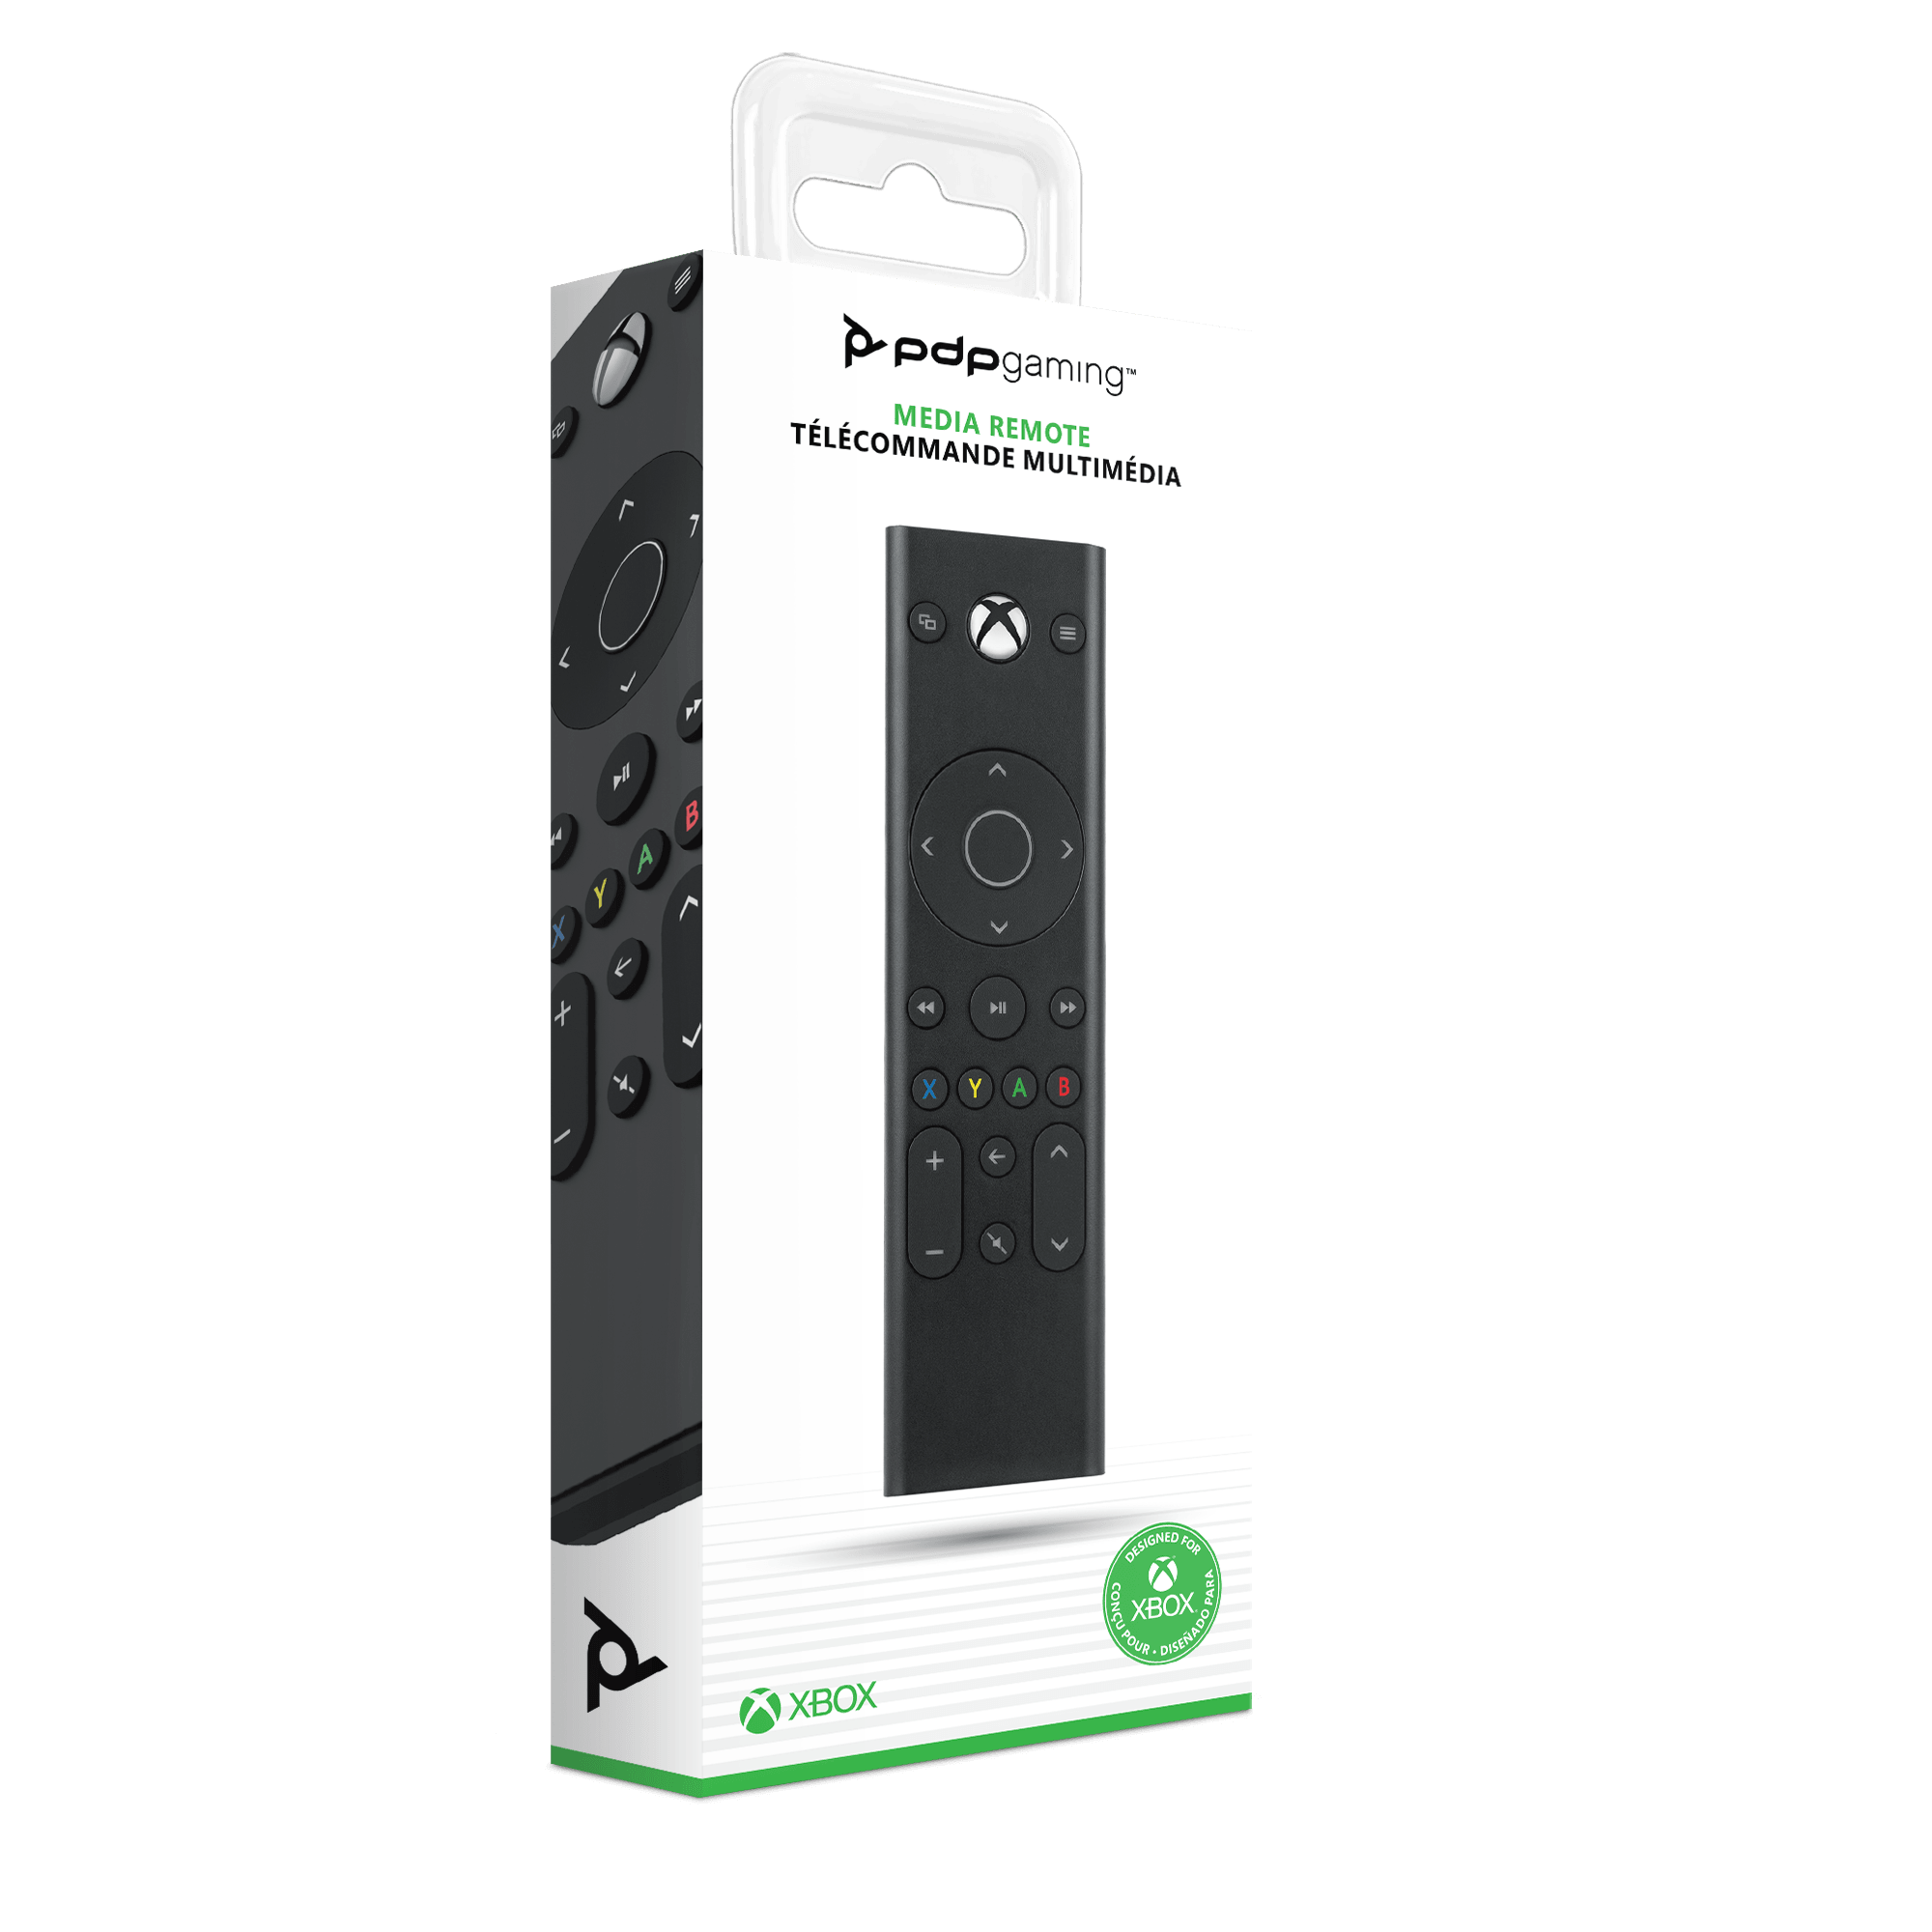 Media Remote For Xbox - Want a New Gadget